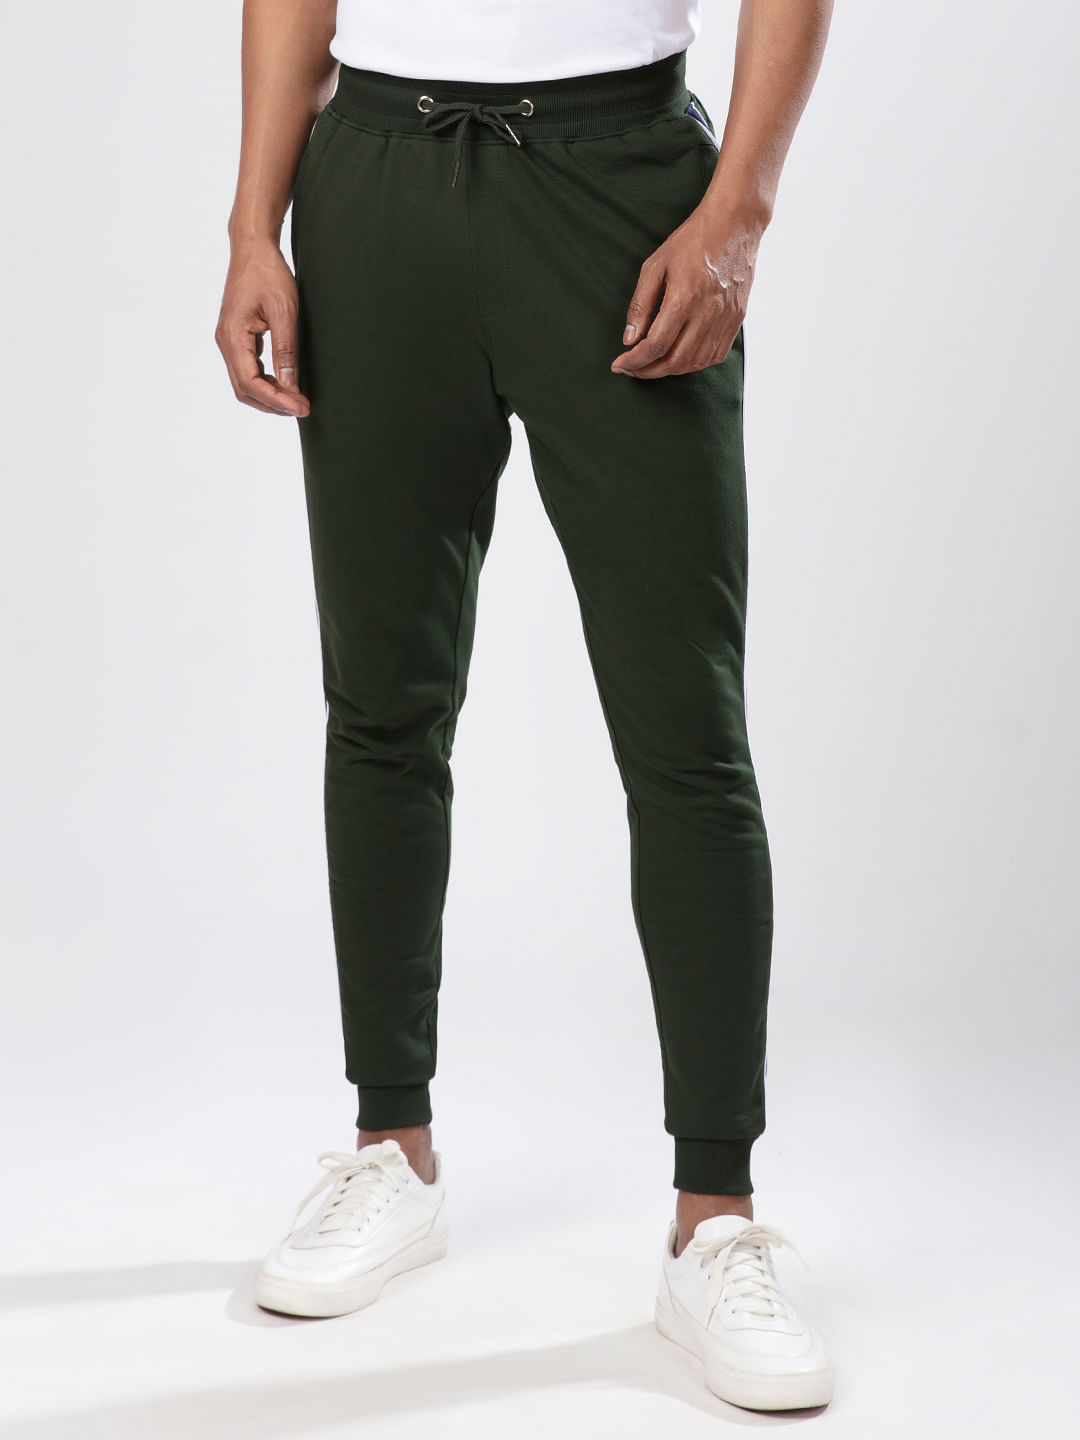 Buy Official Solids Military Olive Joggers Online